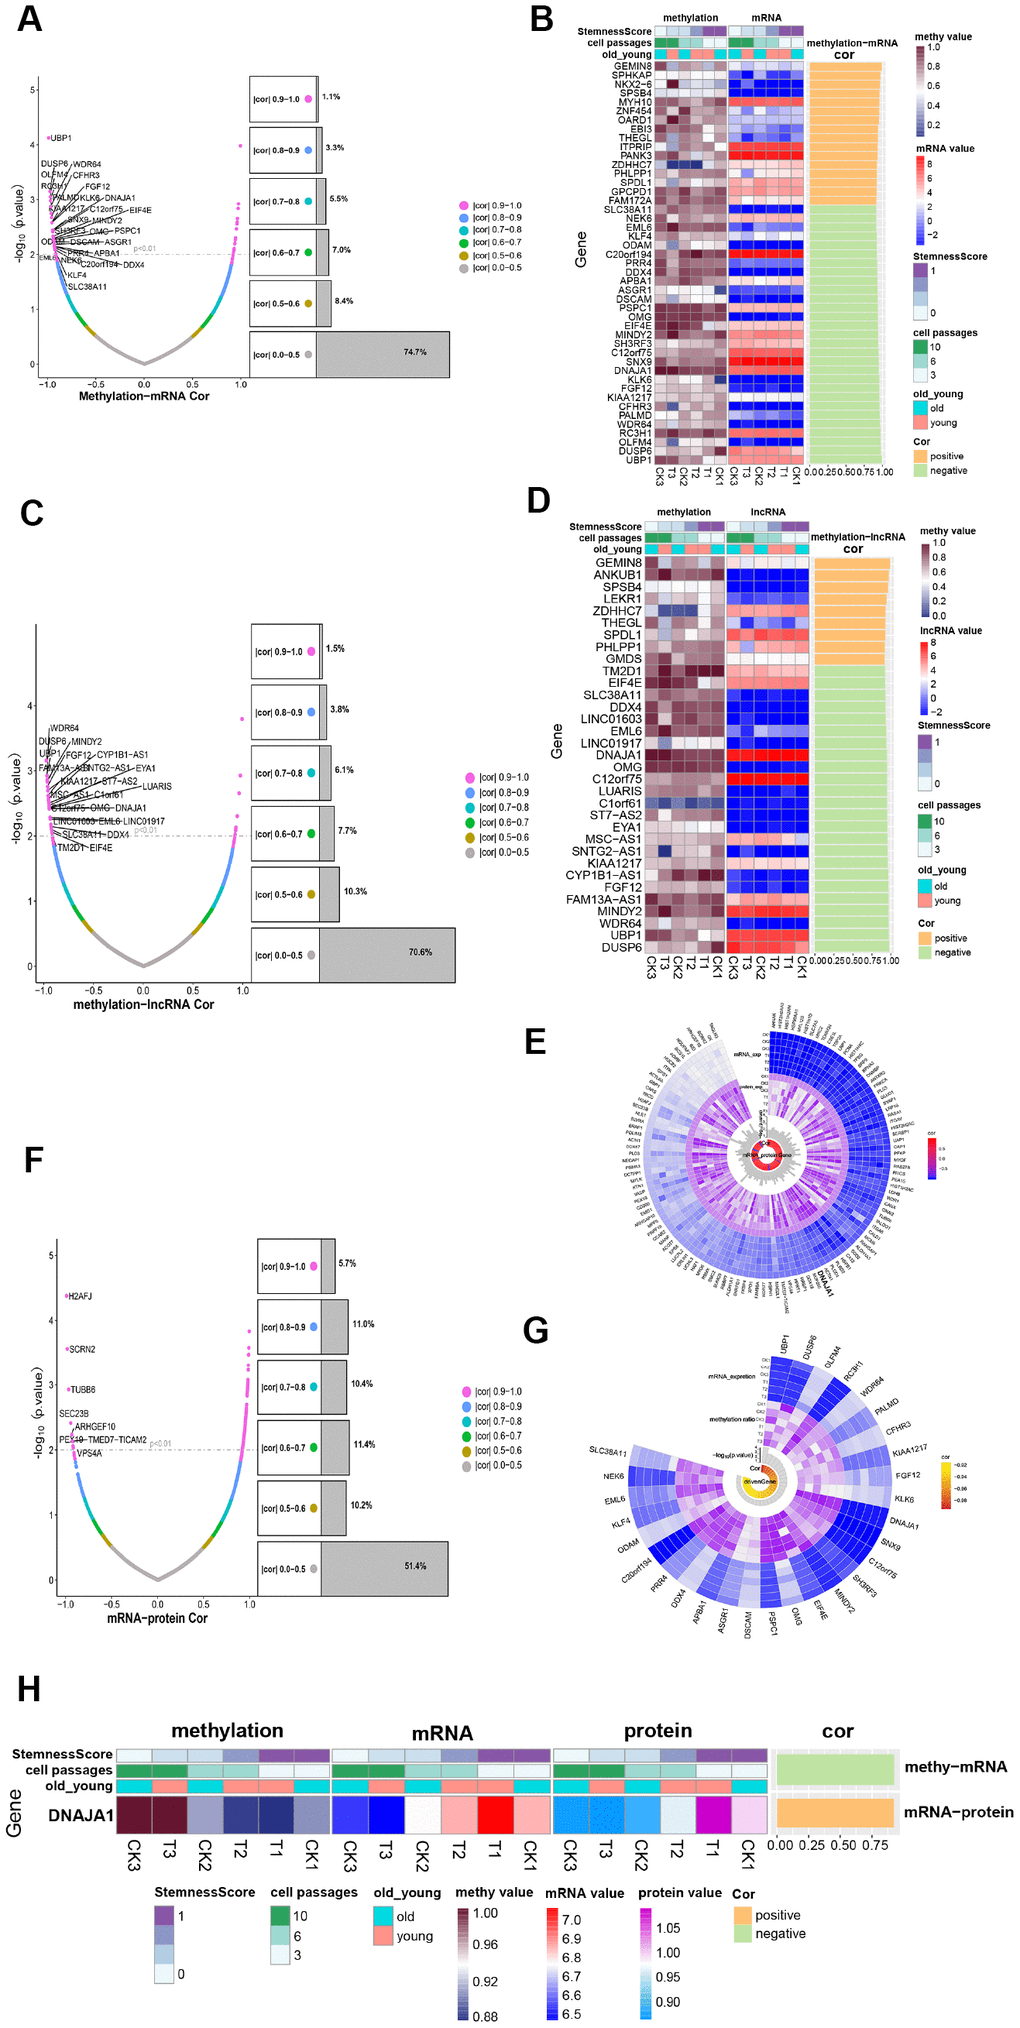 Methylation regulates ADSCs’ expression. (A) Volcanic maps show the correlation and significance of methylation and mRNA expression. (B) Heatmap shows the expression of methylation-transcription related genes among different phenotypes. (C) Volcanic maps show correlation and significance of methylation and lncRNA expression. (D) Heatmap shows the expression of methylation-lncRNA related genes in different phenotypes. (E) CircPlot shows the methylation rate and mRNA expression of 29 methylation-regulated transcription genes in 6 samples as well as their correlation and significance. (F) Volcanic maps show the correlation and significance of mRNA and protein expression. (G) circPlot displays the mRNA and protein expression of 117 mRNA